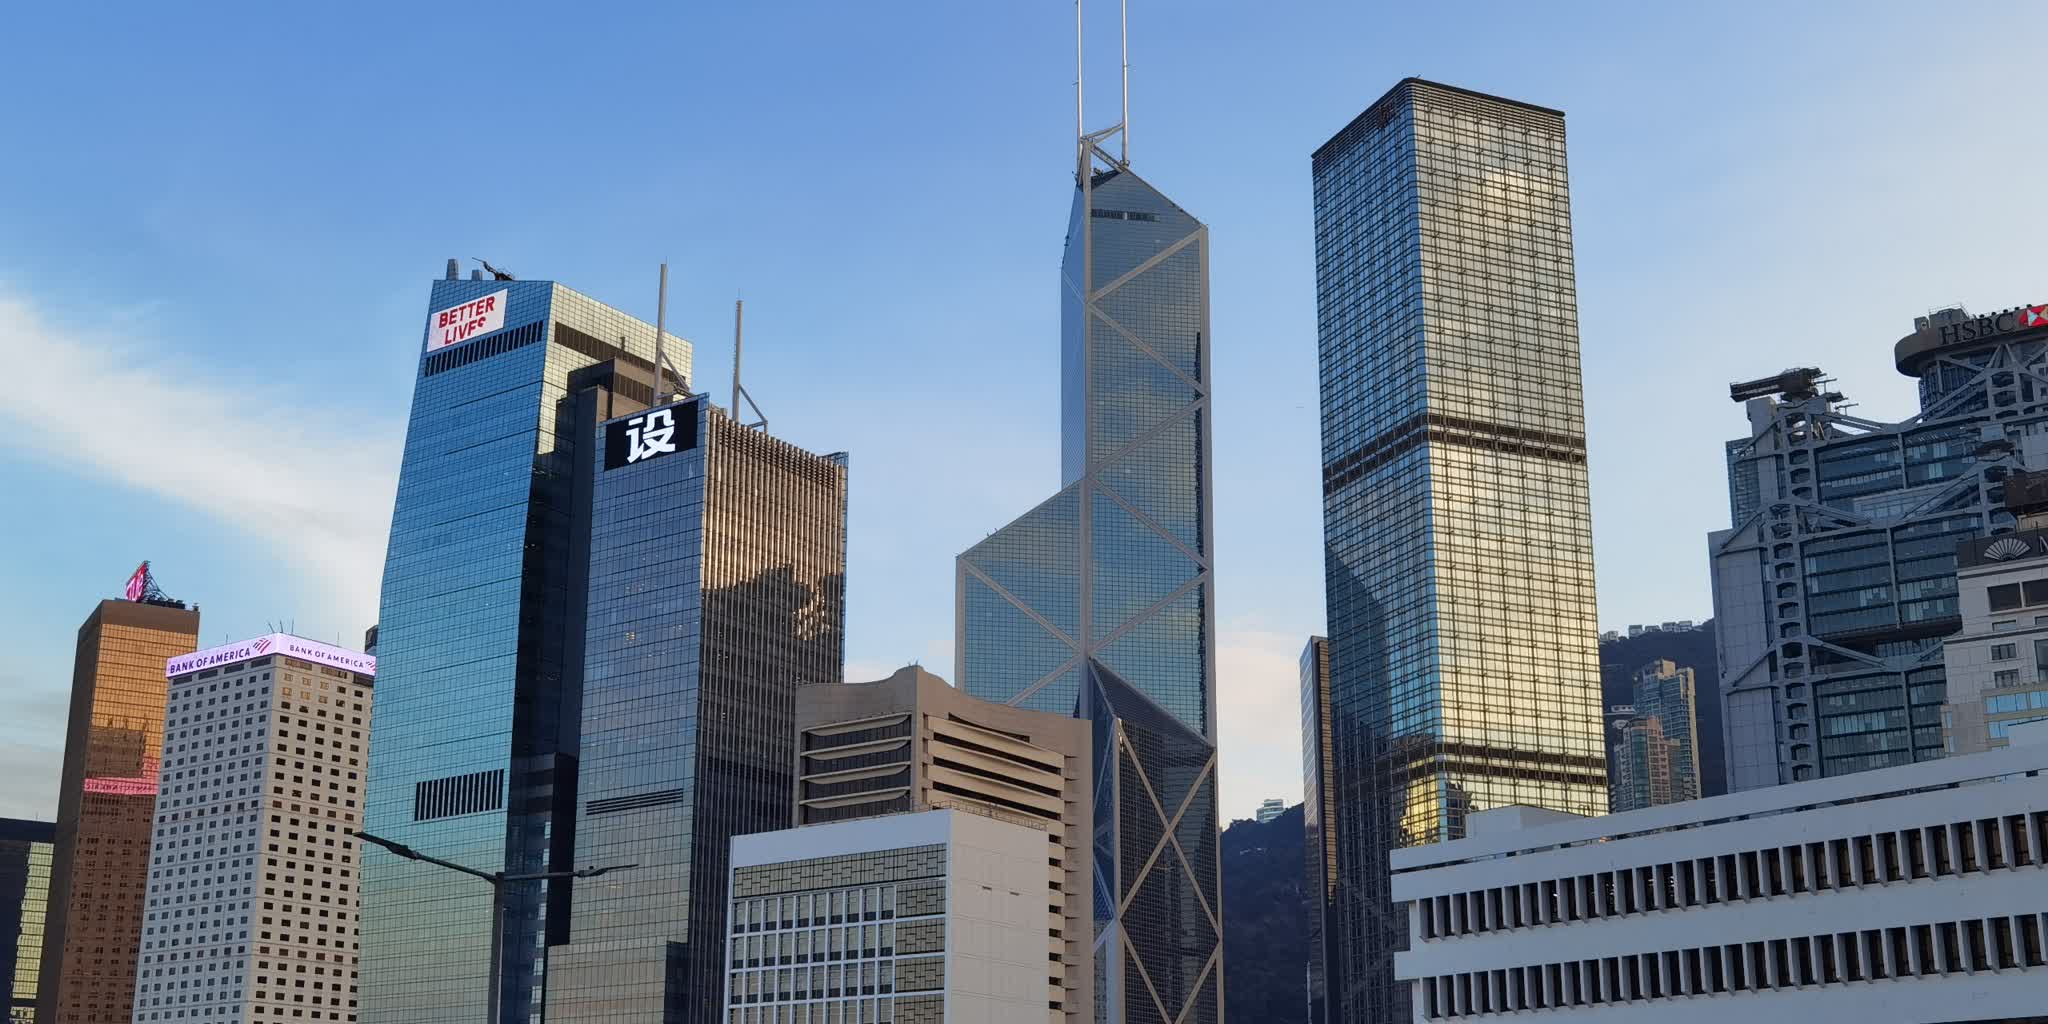 HK ranked fourth in Global Financial Centres Index